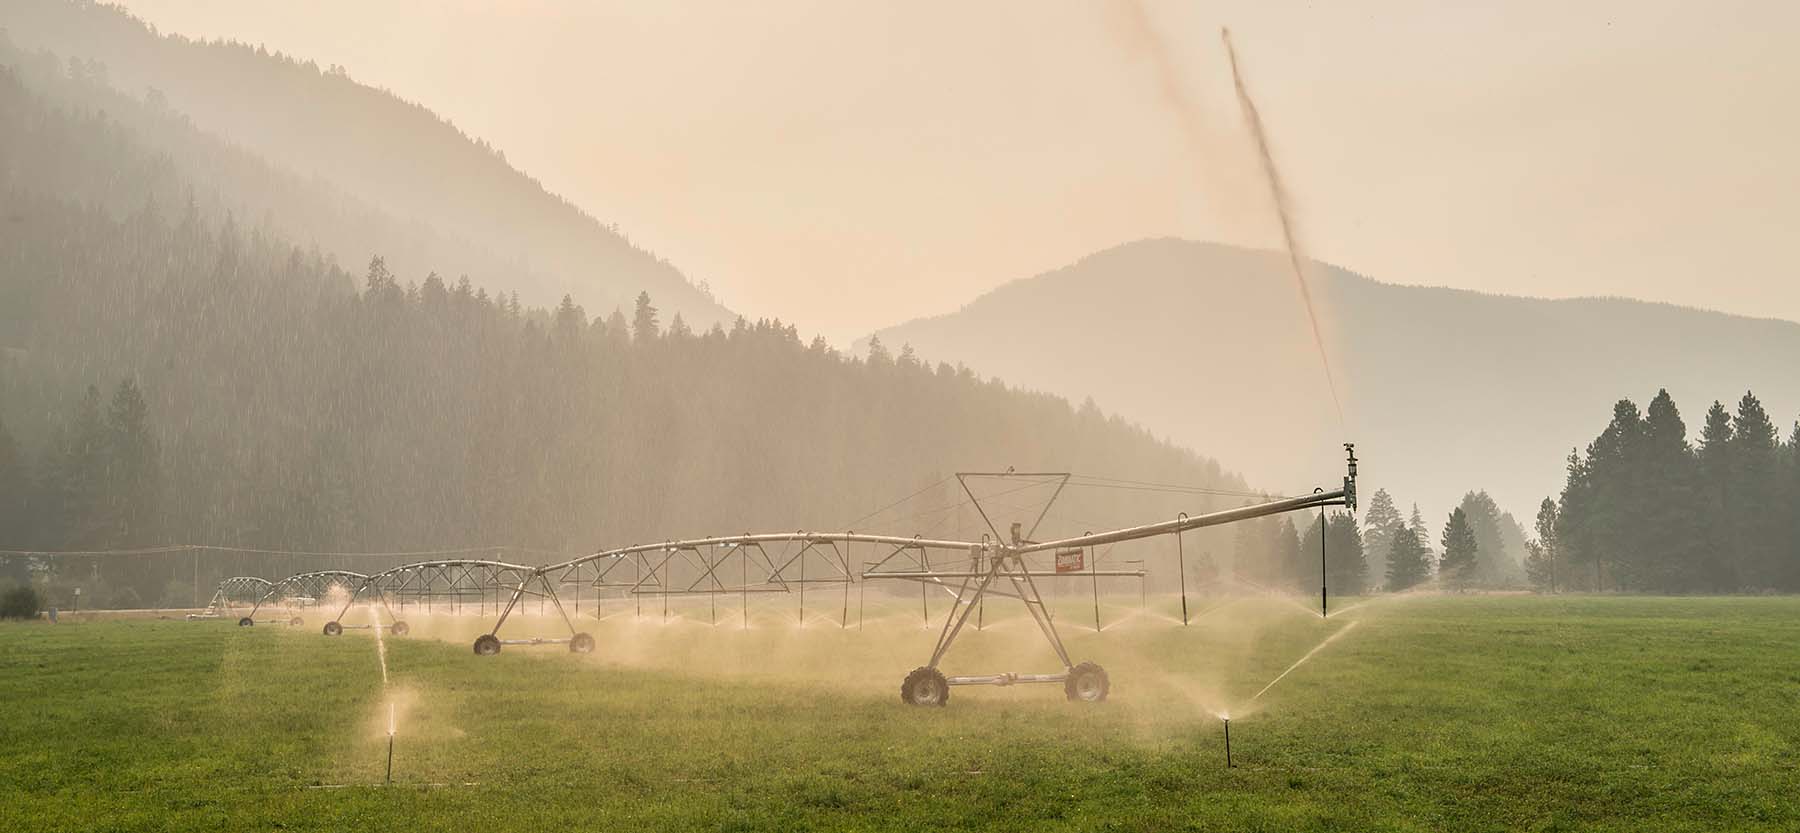 An irrigation system waters a field with barely-visible mountains in the background and the sky filled with wildfire smoke.